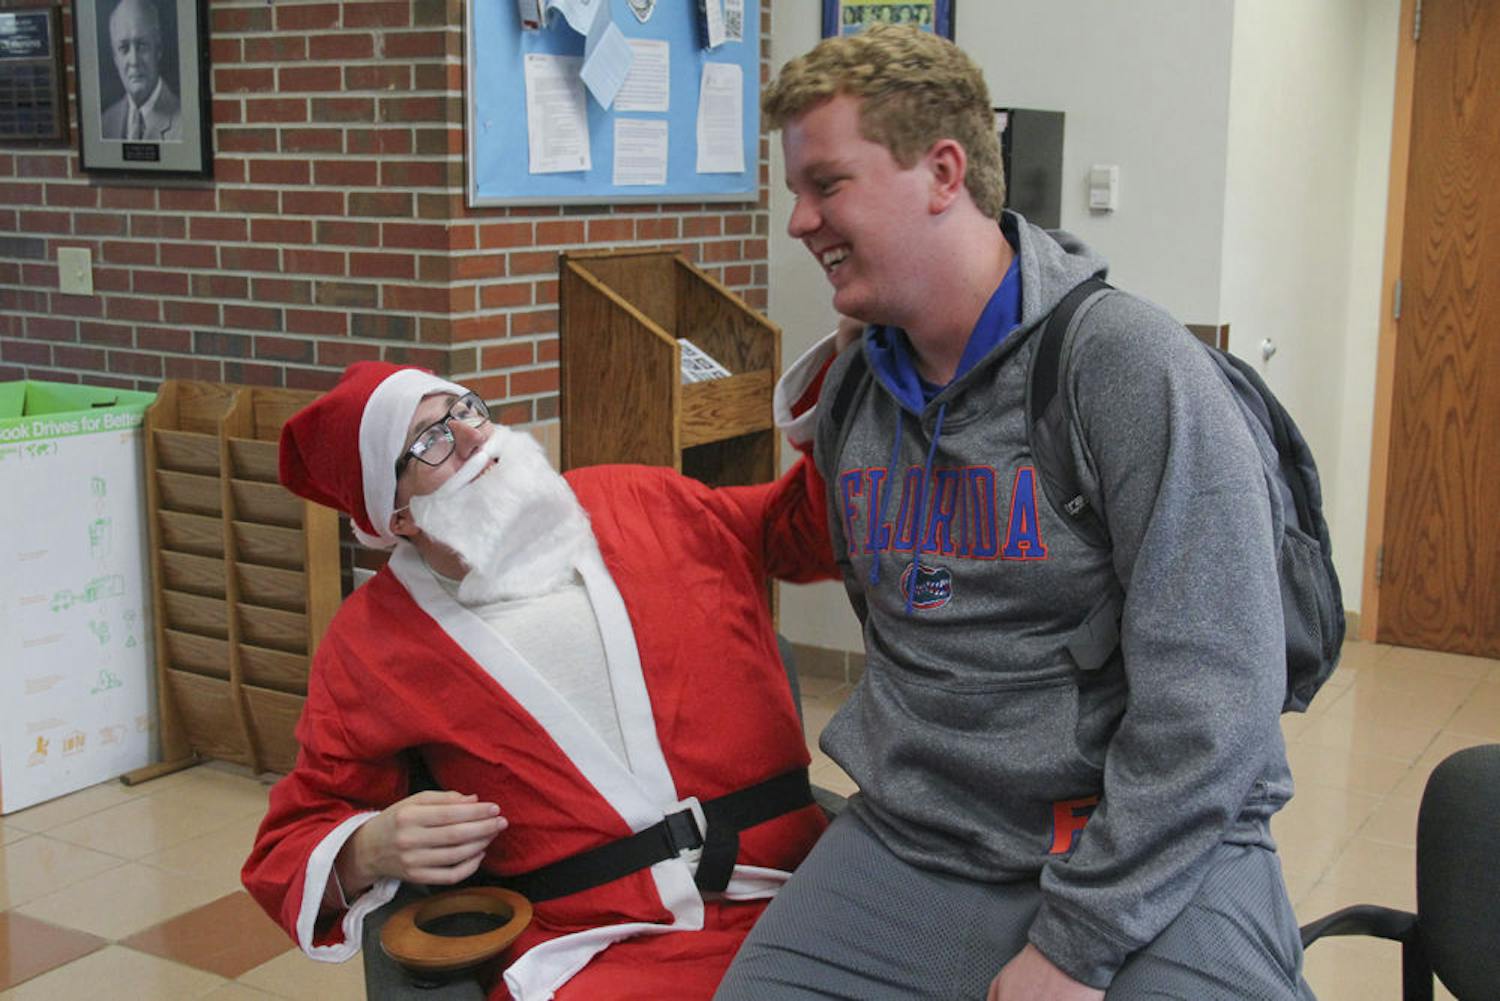 Nicolas Lomurro, a 19-year-old UF finance freshman, sits on the lap of Marty Cohen, an 18-year-old UF biology freshman, in Hume Hall on Dec. 8, 2015. Cohen played Santa at the “Snowflakes and Santa” event to relieve students’ stress before finals.